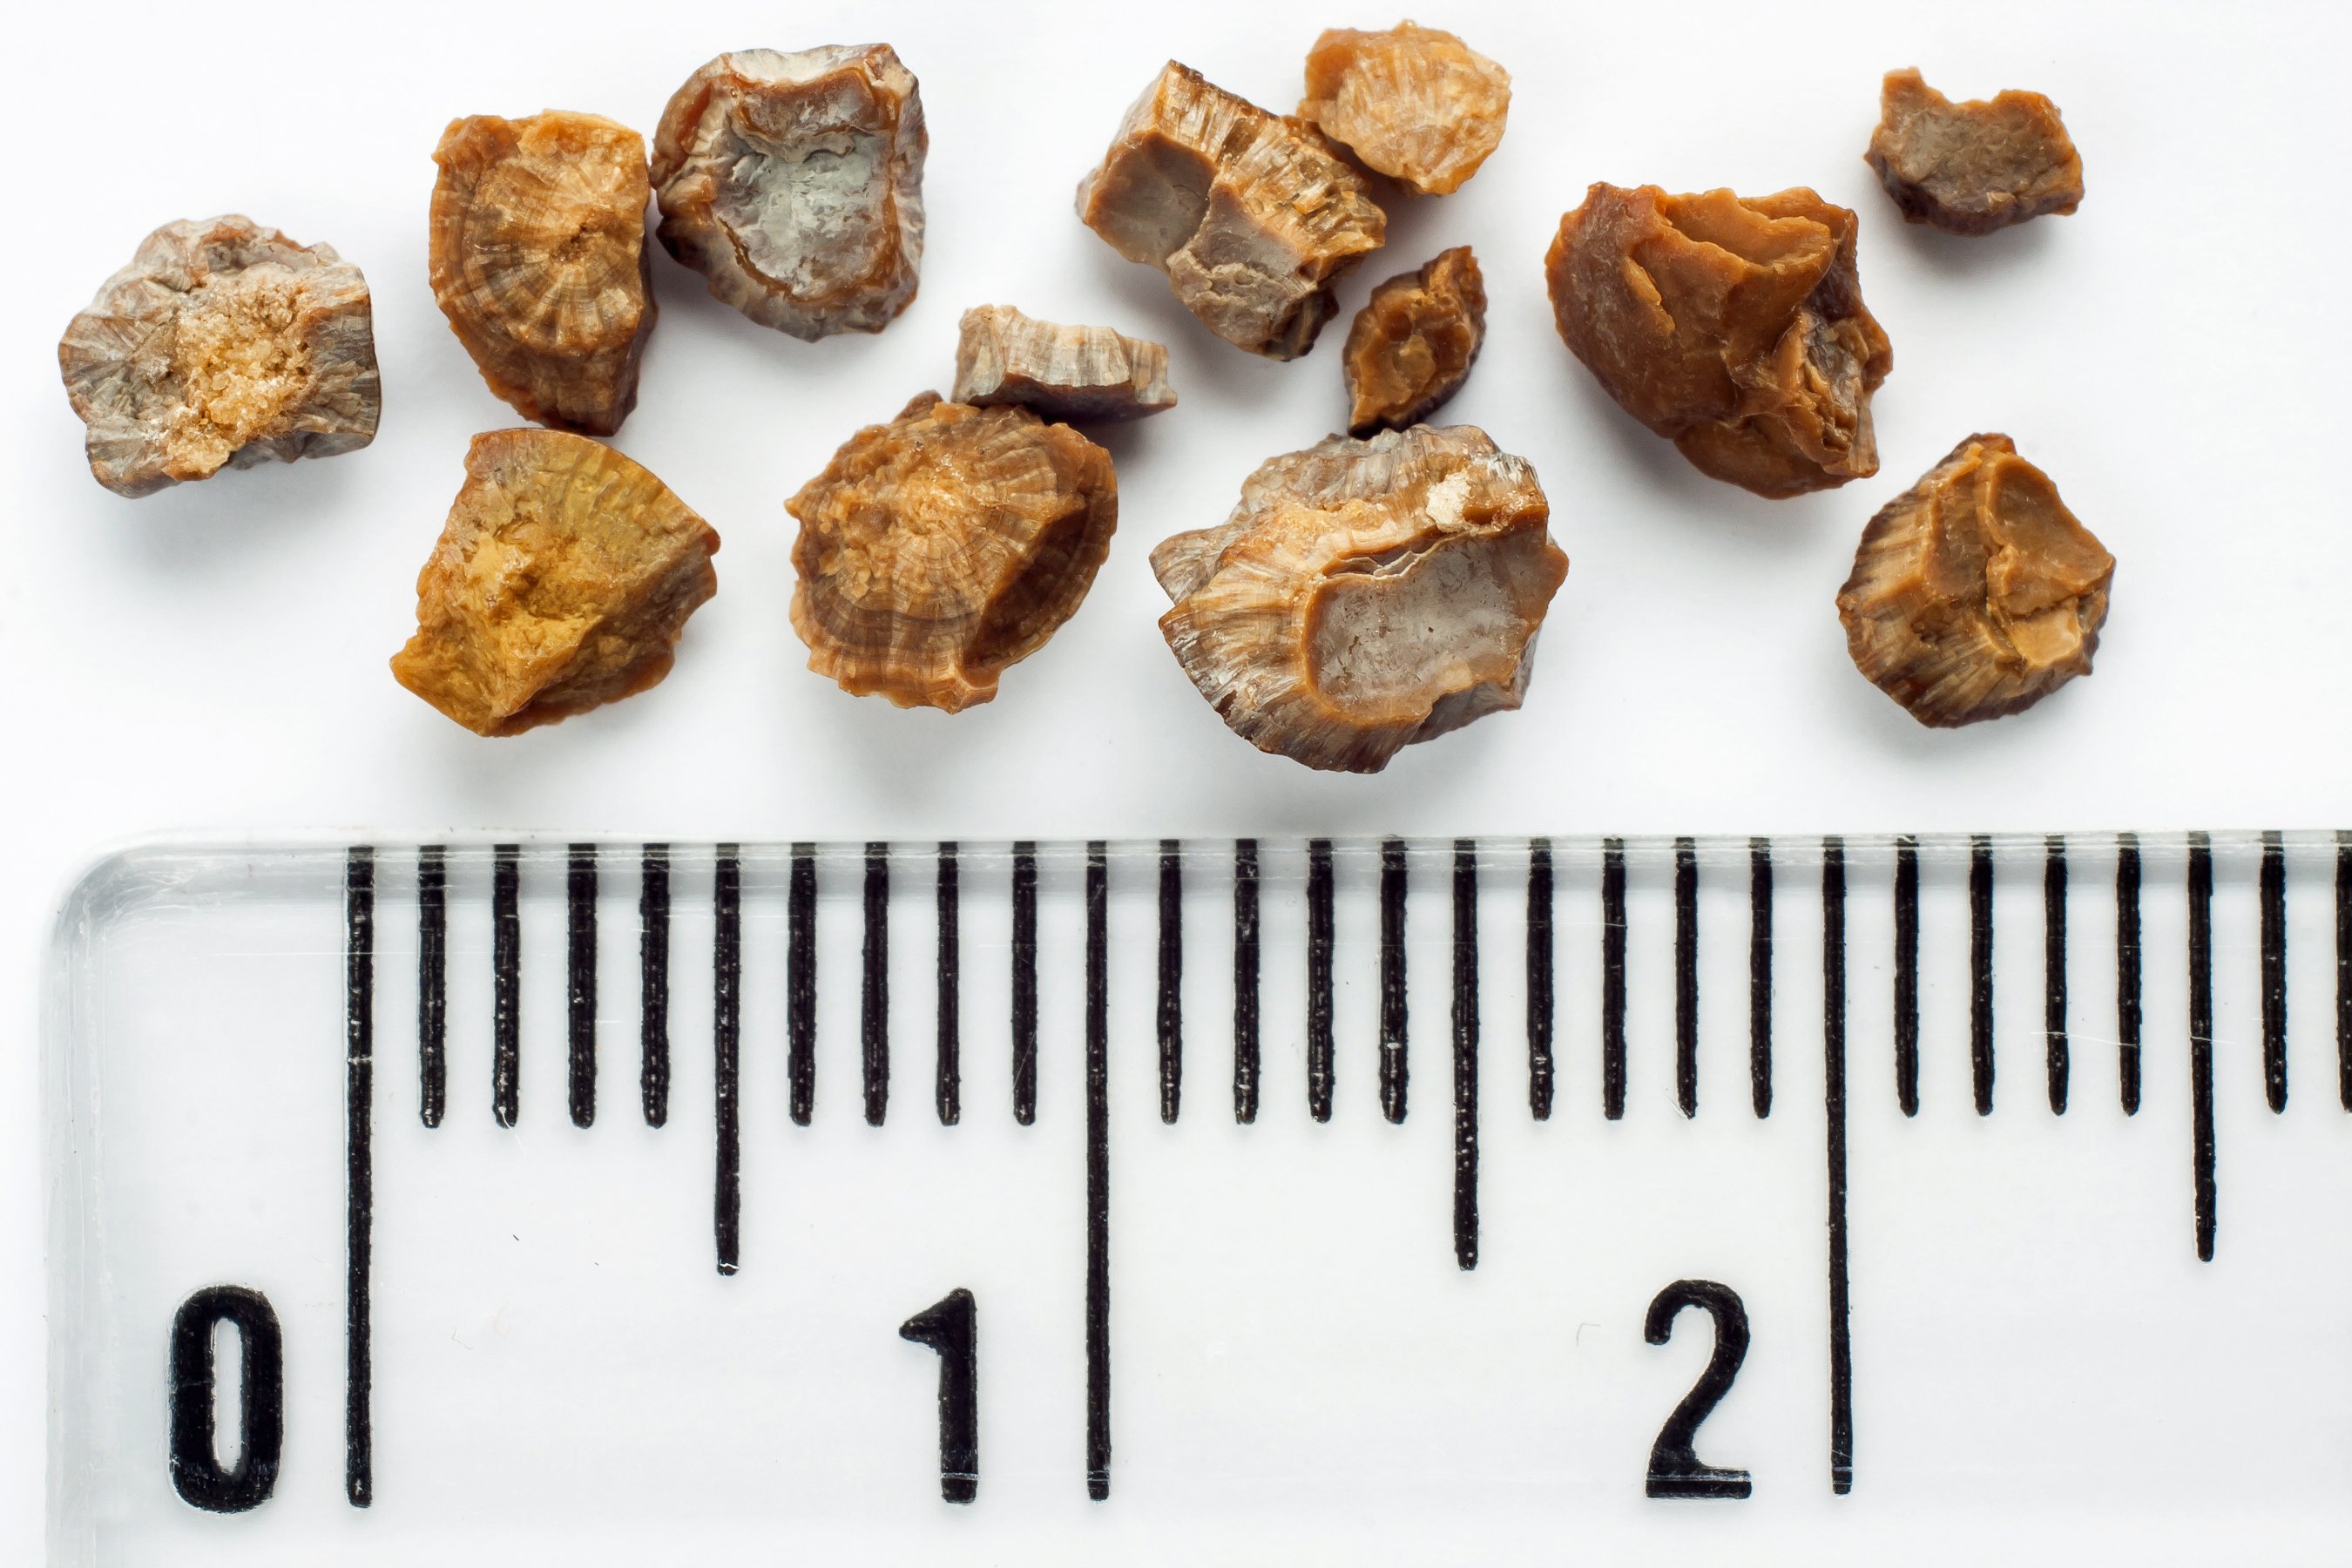 kidney-stones-what-are-they-and-how-are-they-treated-revere-health